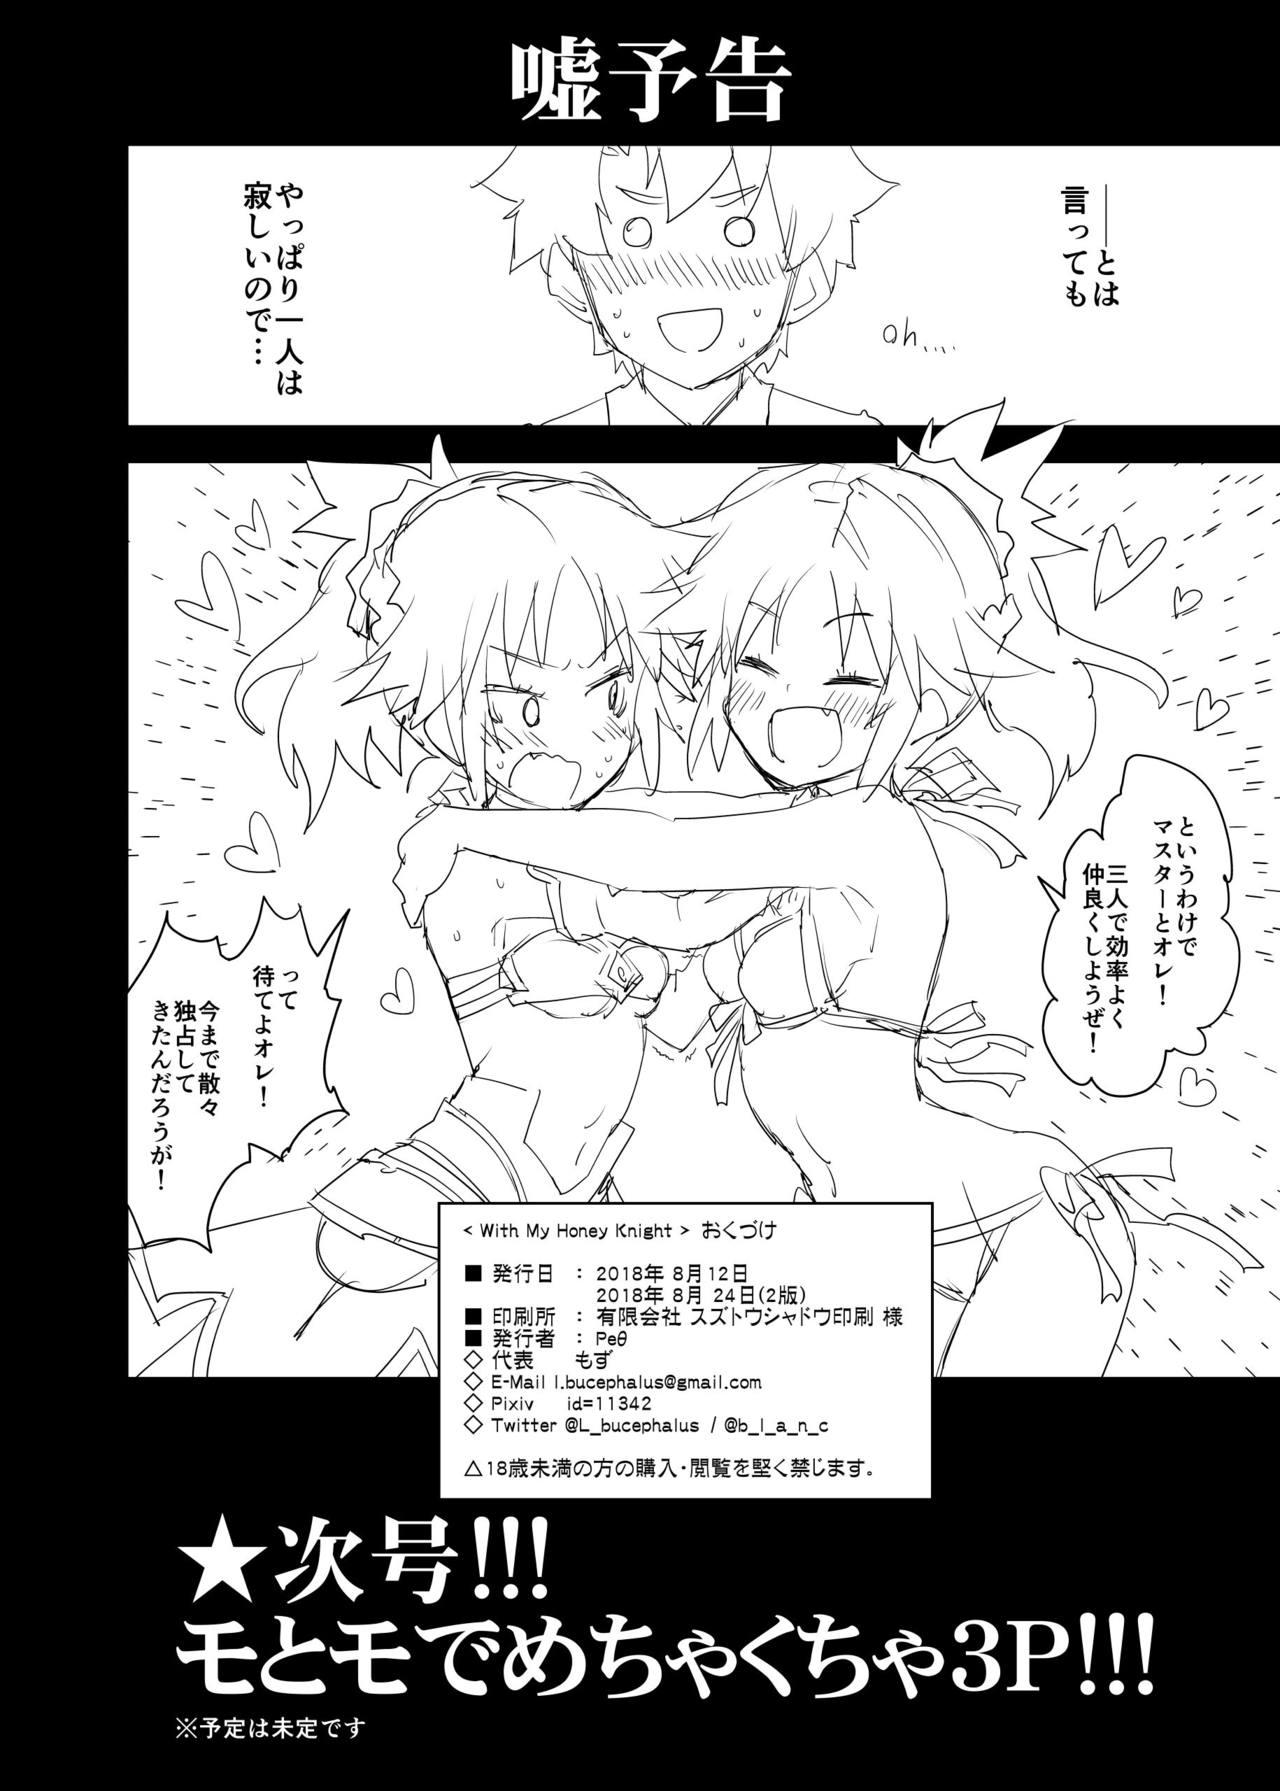 Adult Toys With My Honey Knight - Fate grand order This - Page 29